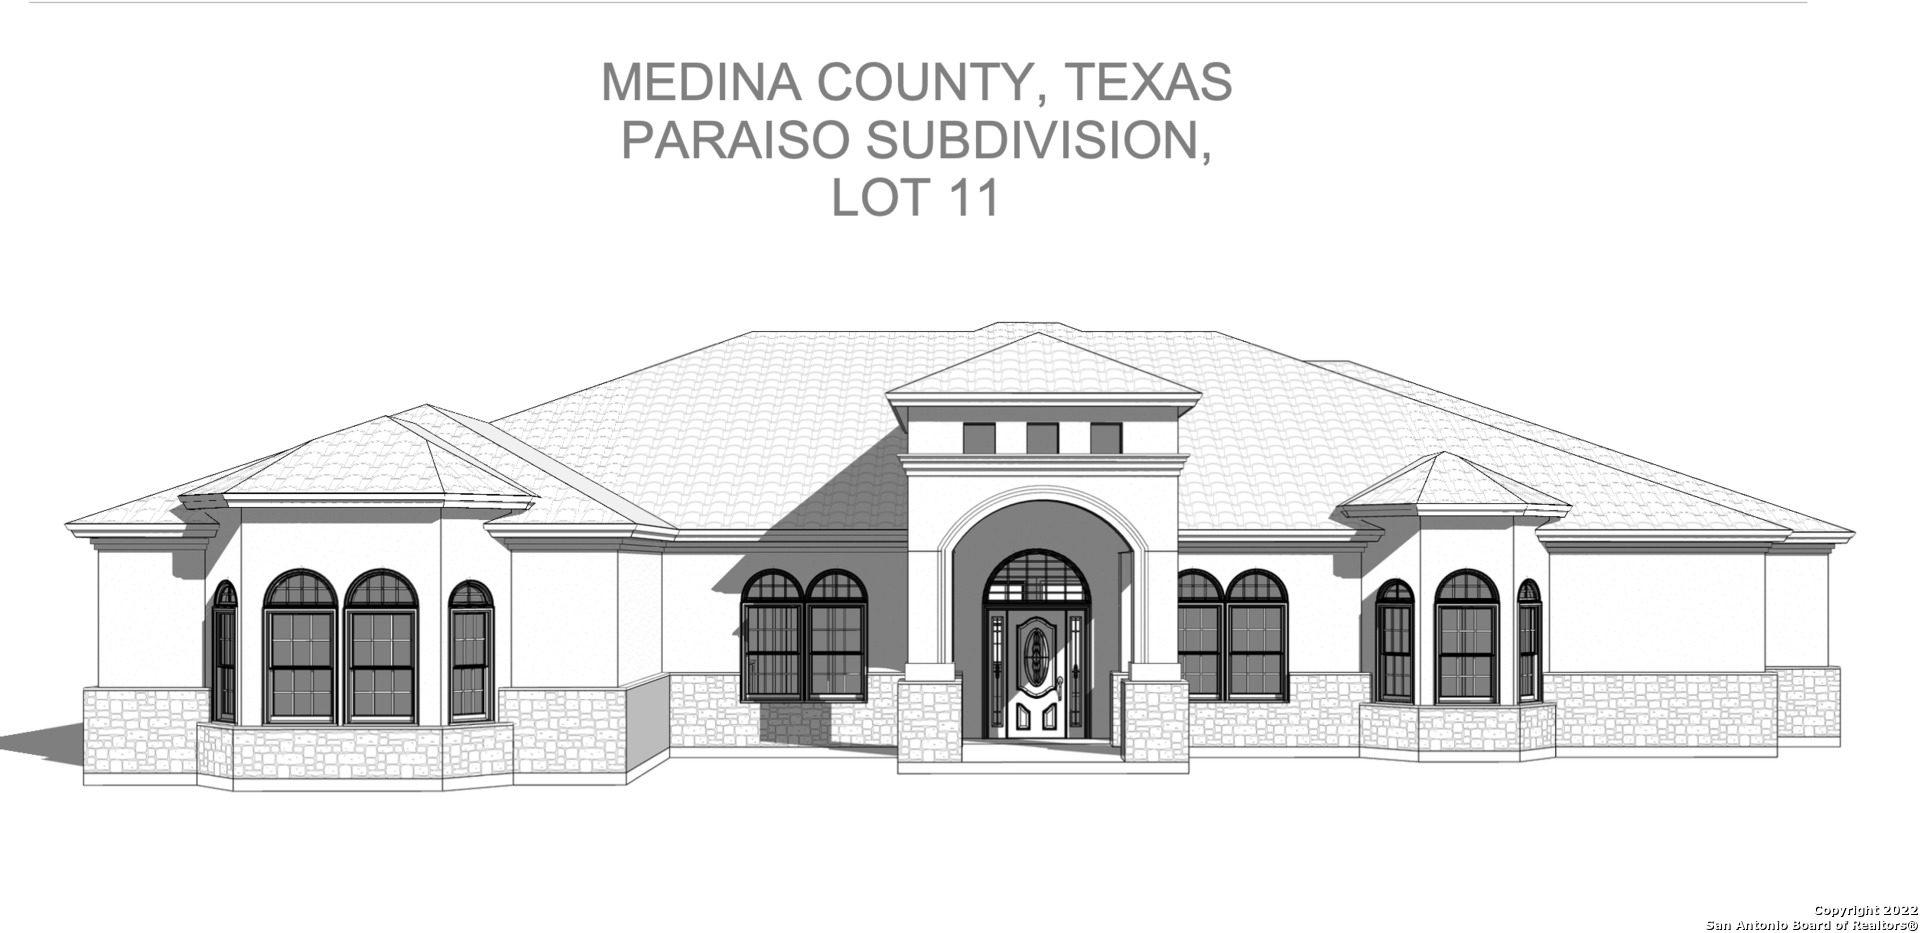 Welcome to Venado Oaks! This upcoming and much-anticipated community will offer upscale living starting with gated access and followed by paved roads and driveways that lead into oversized homesites all over an acre! Each home will be constructed by custom builders and this home for sale now already has begun construction with a projected completion date of November/December of 2022. You can certainly view the floor plan and drive through the community to see progress but why wait and let this opportunity go?? Schedule a Construction meeting with us to see how much you can still customize, color selections, and more details!